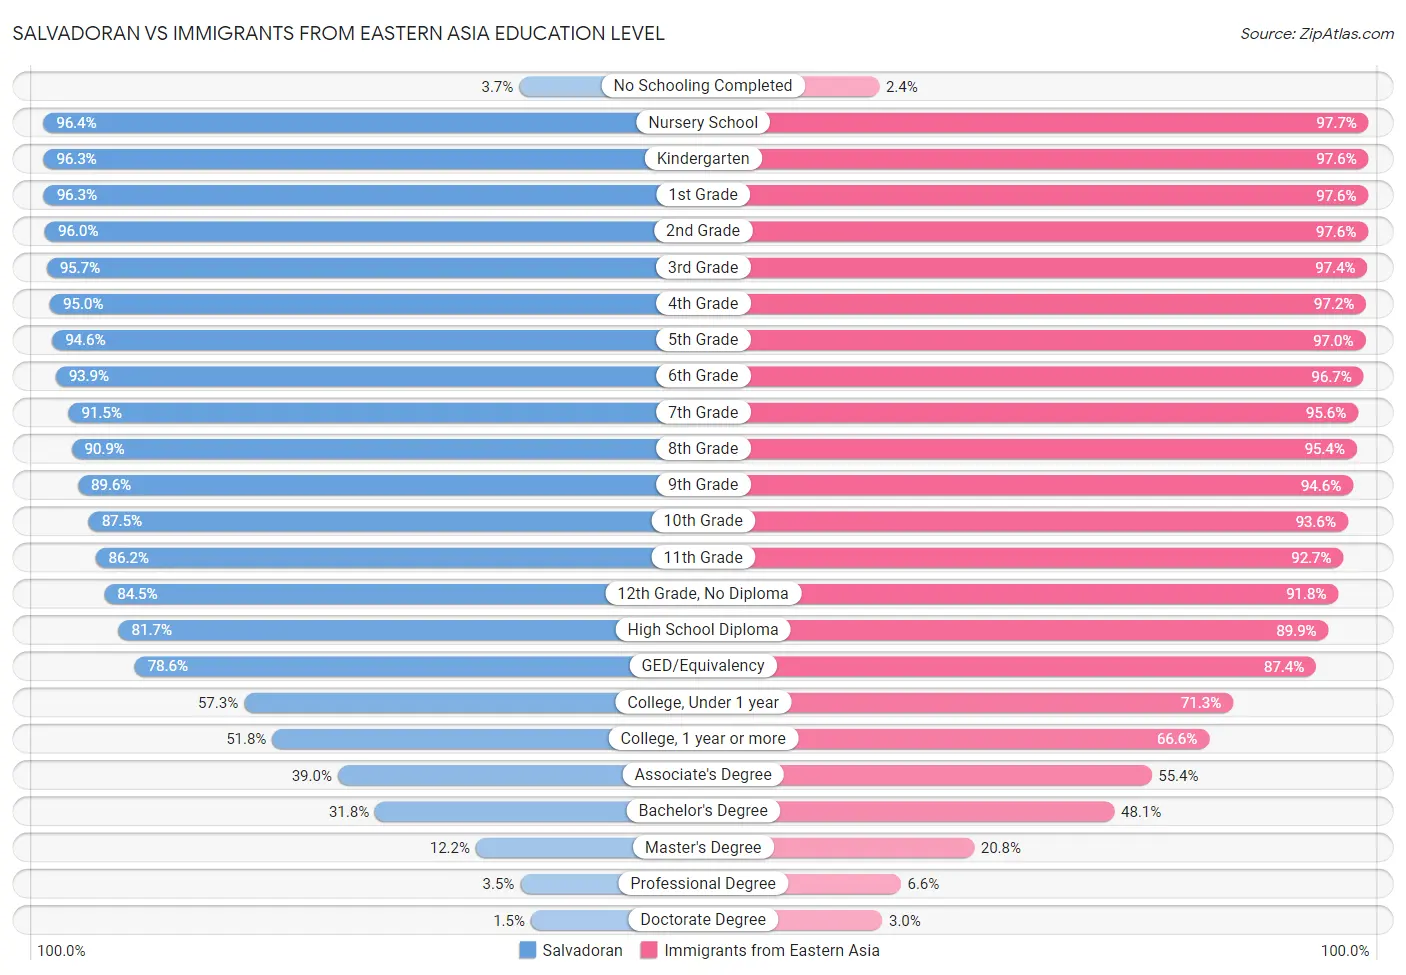 Salvadoran vs Immigrants from Eastern Asia Education Level